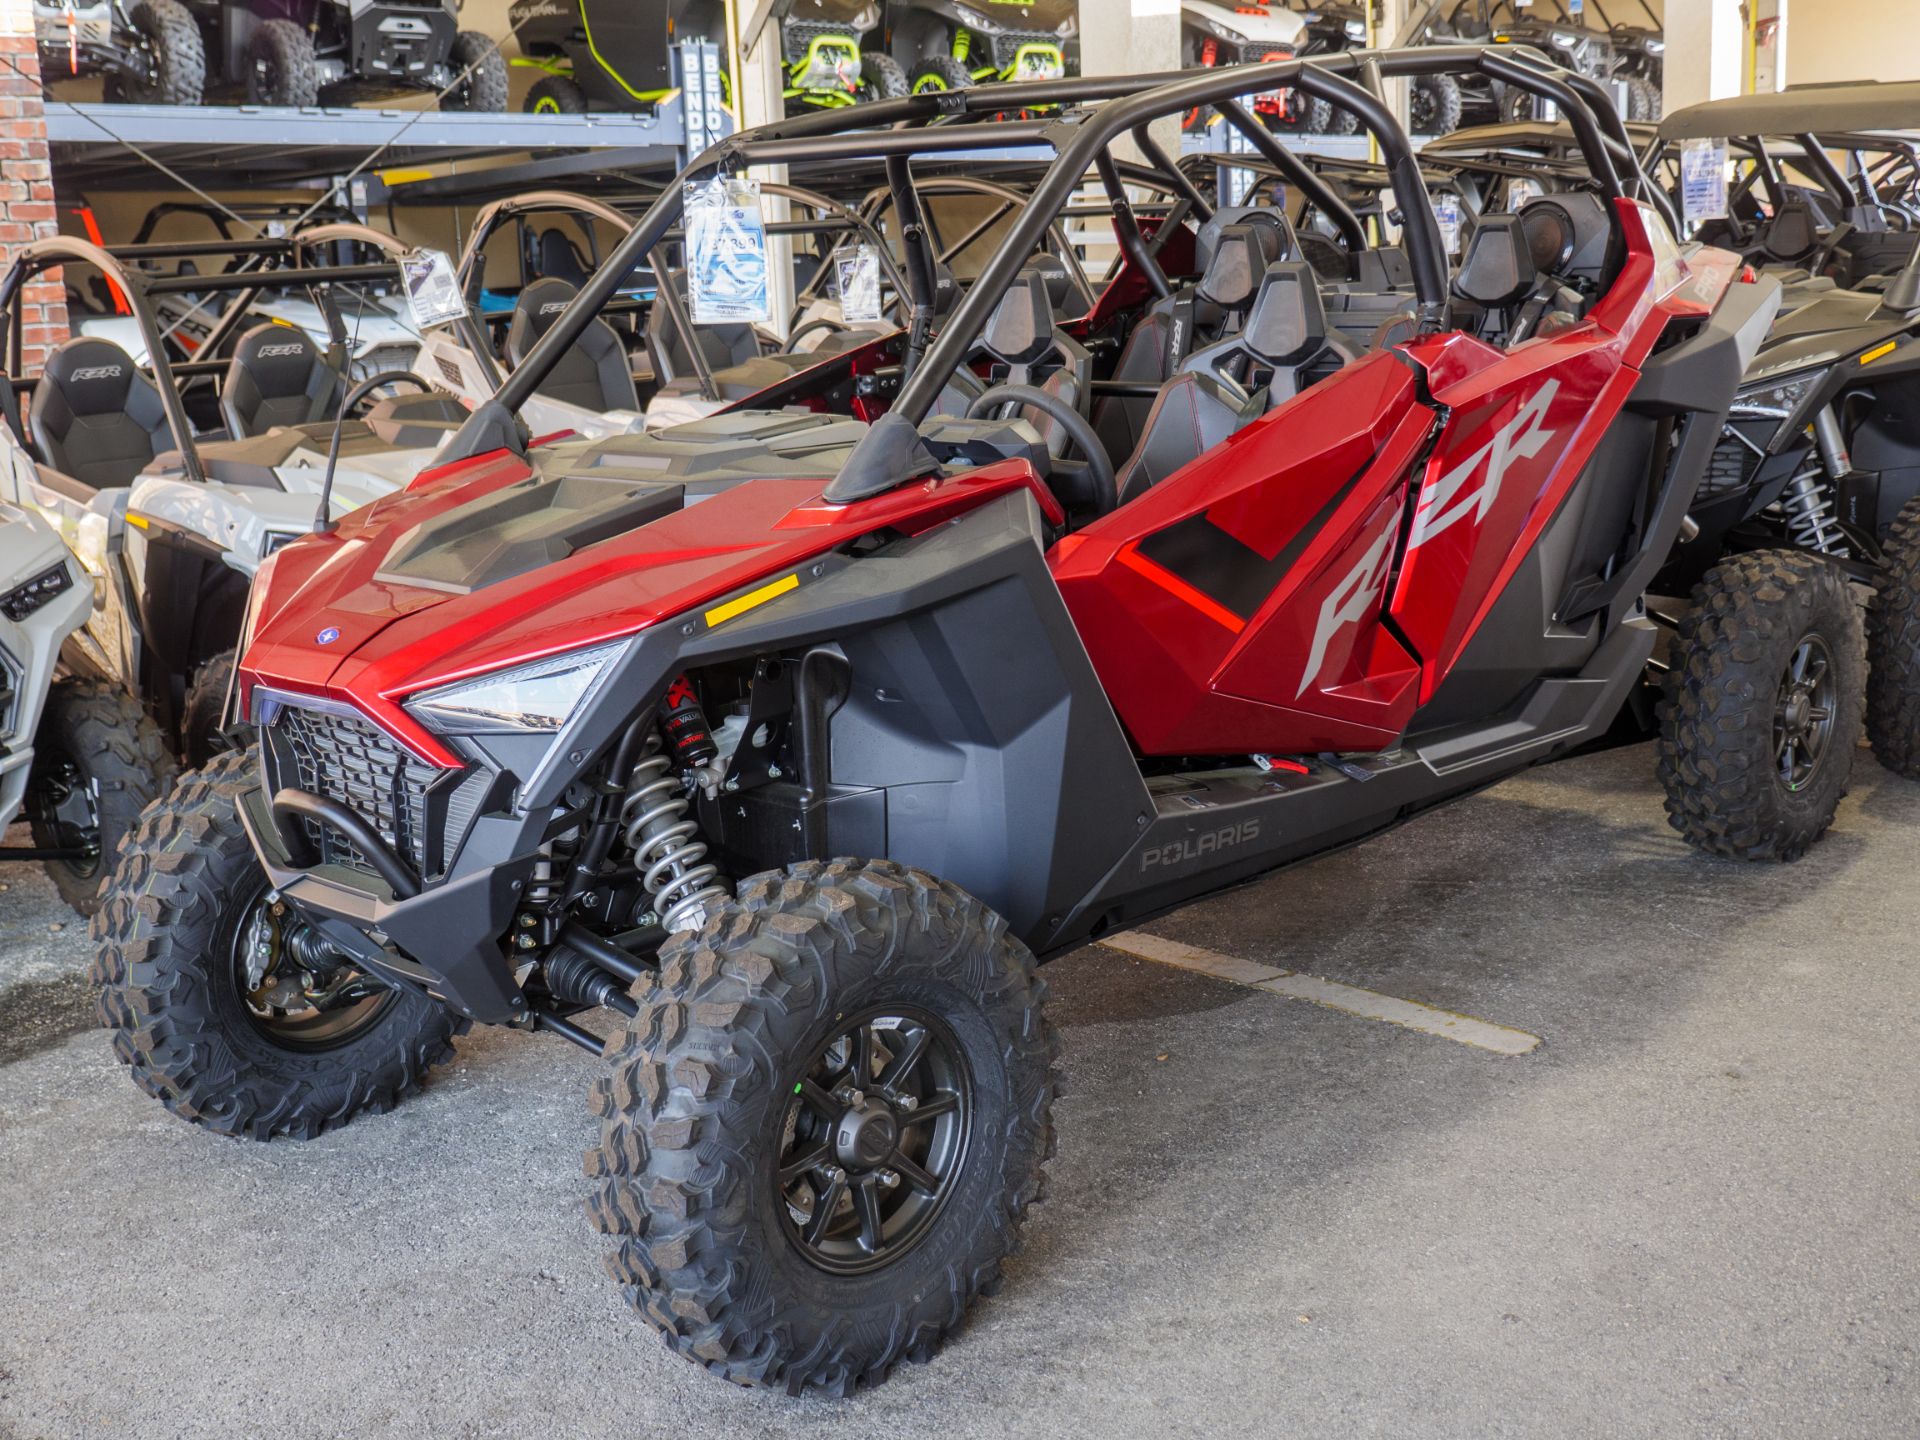 2023 Polaris RZR Pro XP 4 Ultimate in Clearwater, Florida - Photo 1